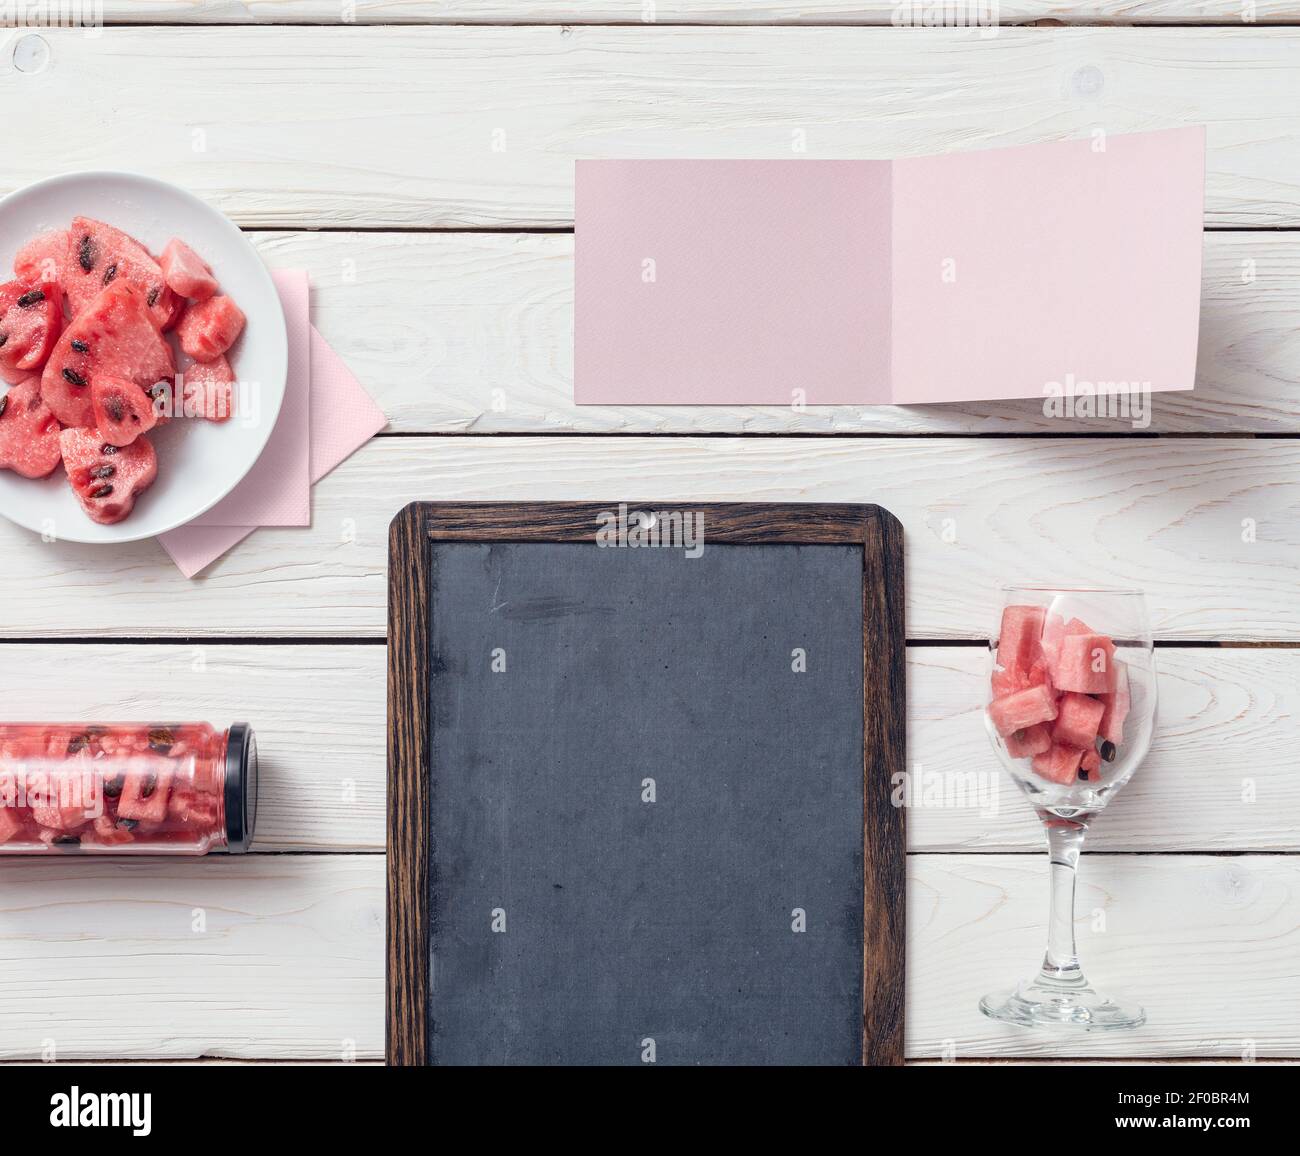 Chalkboard and tag on a desk with watermelon. Top view. Stock Photo